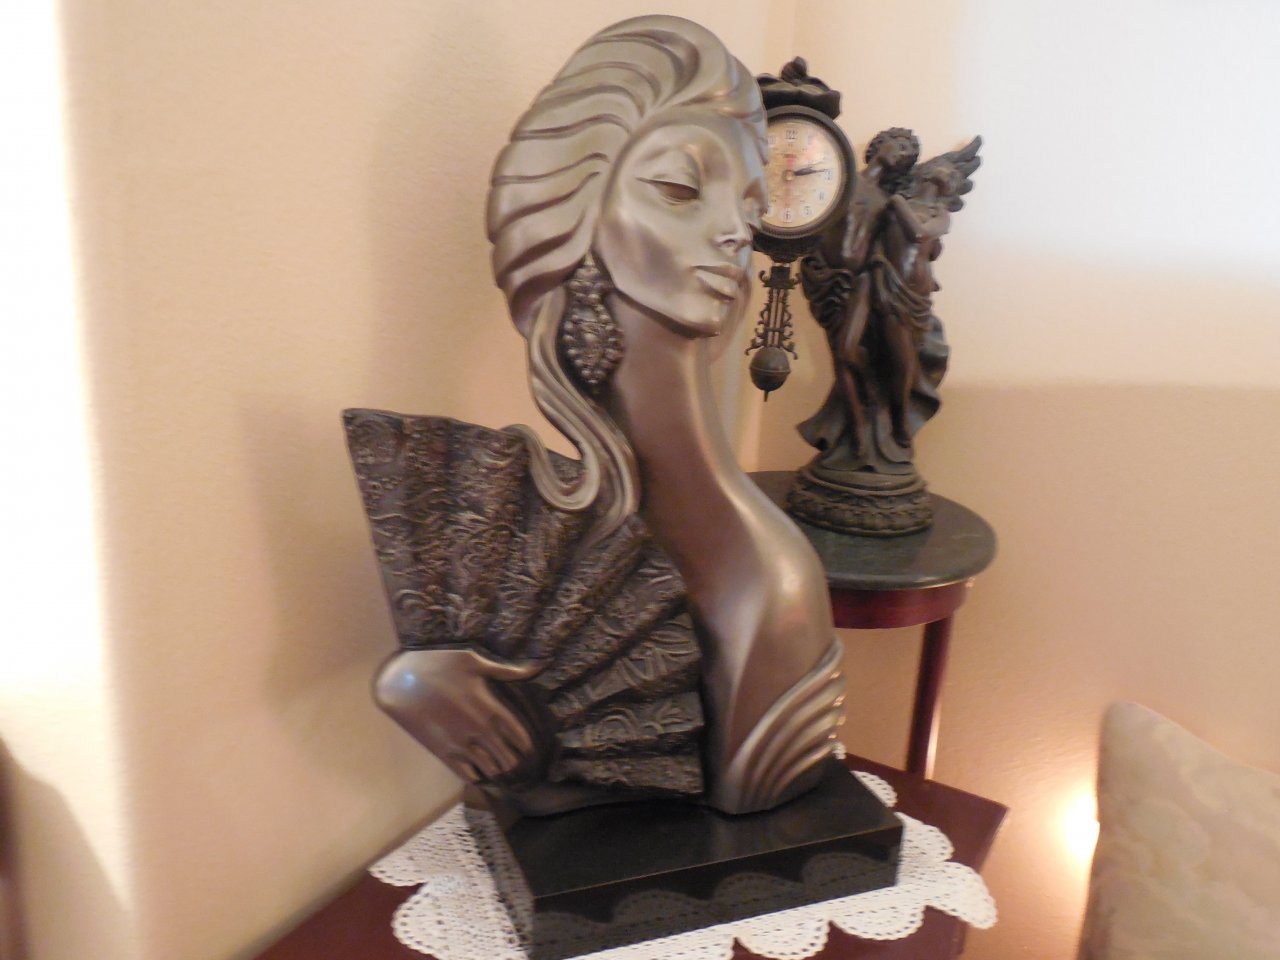 Help Identifying The Name Of This Austin Productions Sculpture By A